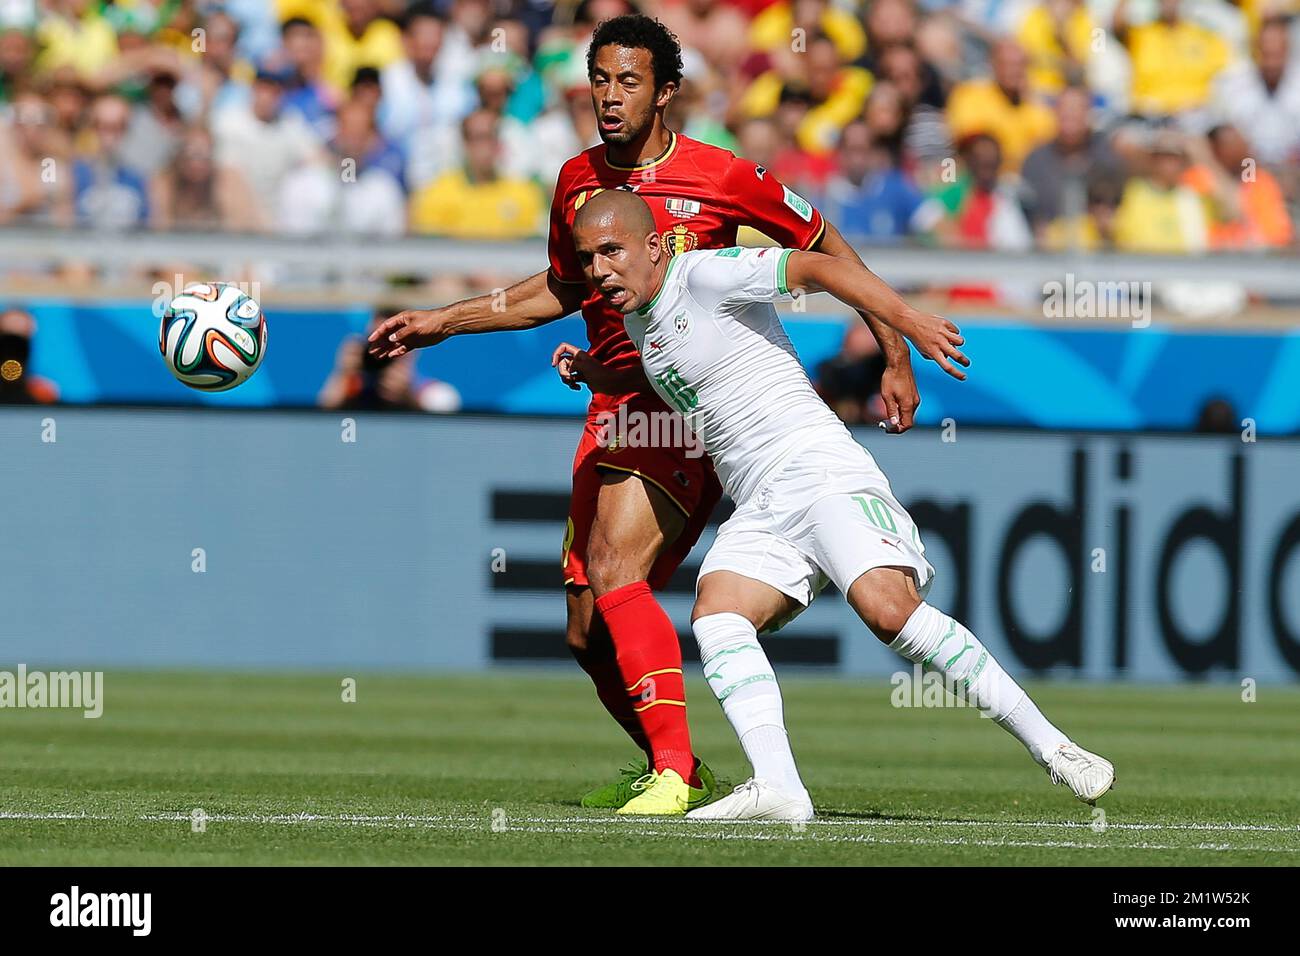 Belgium's Moussa Dembele and Algeria's Sofiane Feghouli fight for the ball during a soccer game between Belgian national team The Red Devils and Algeria in Belo Horizonte, Brazil, the first game in Group H of the first round of the 2014 FIFA World Cup, Tuesday 17 June 2014. Stock Photo